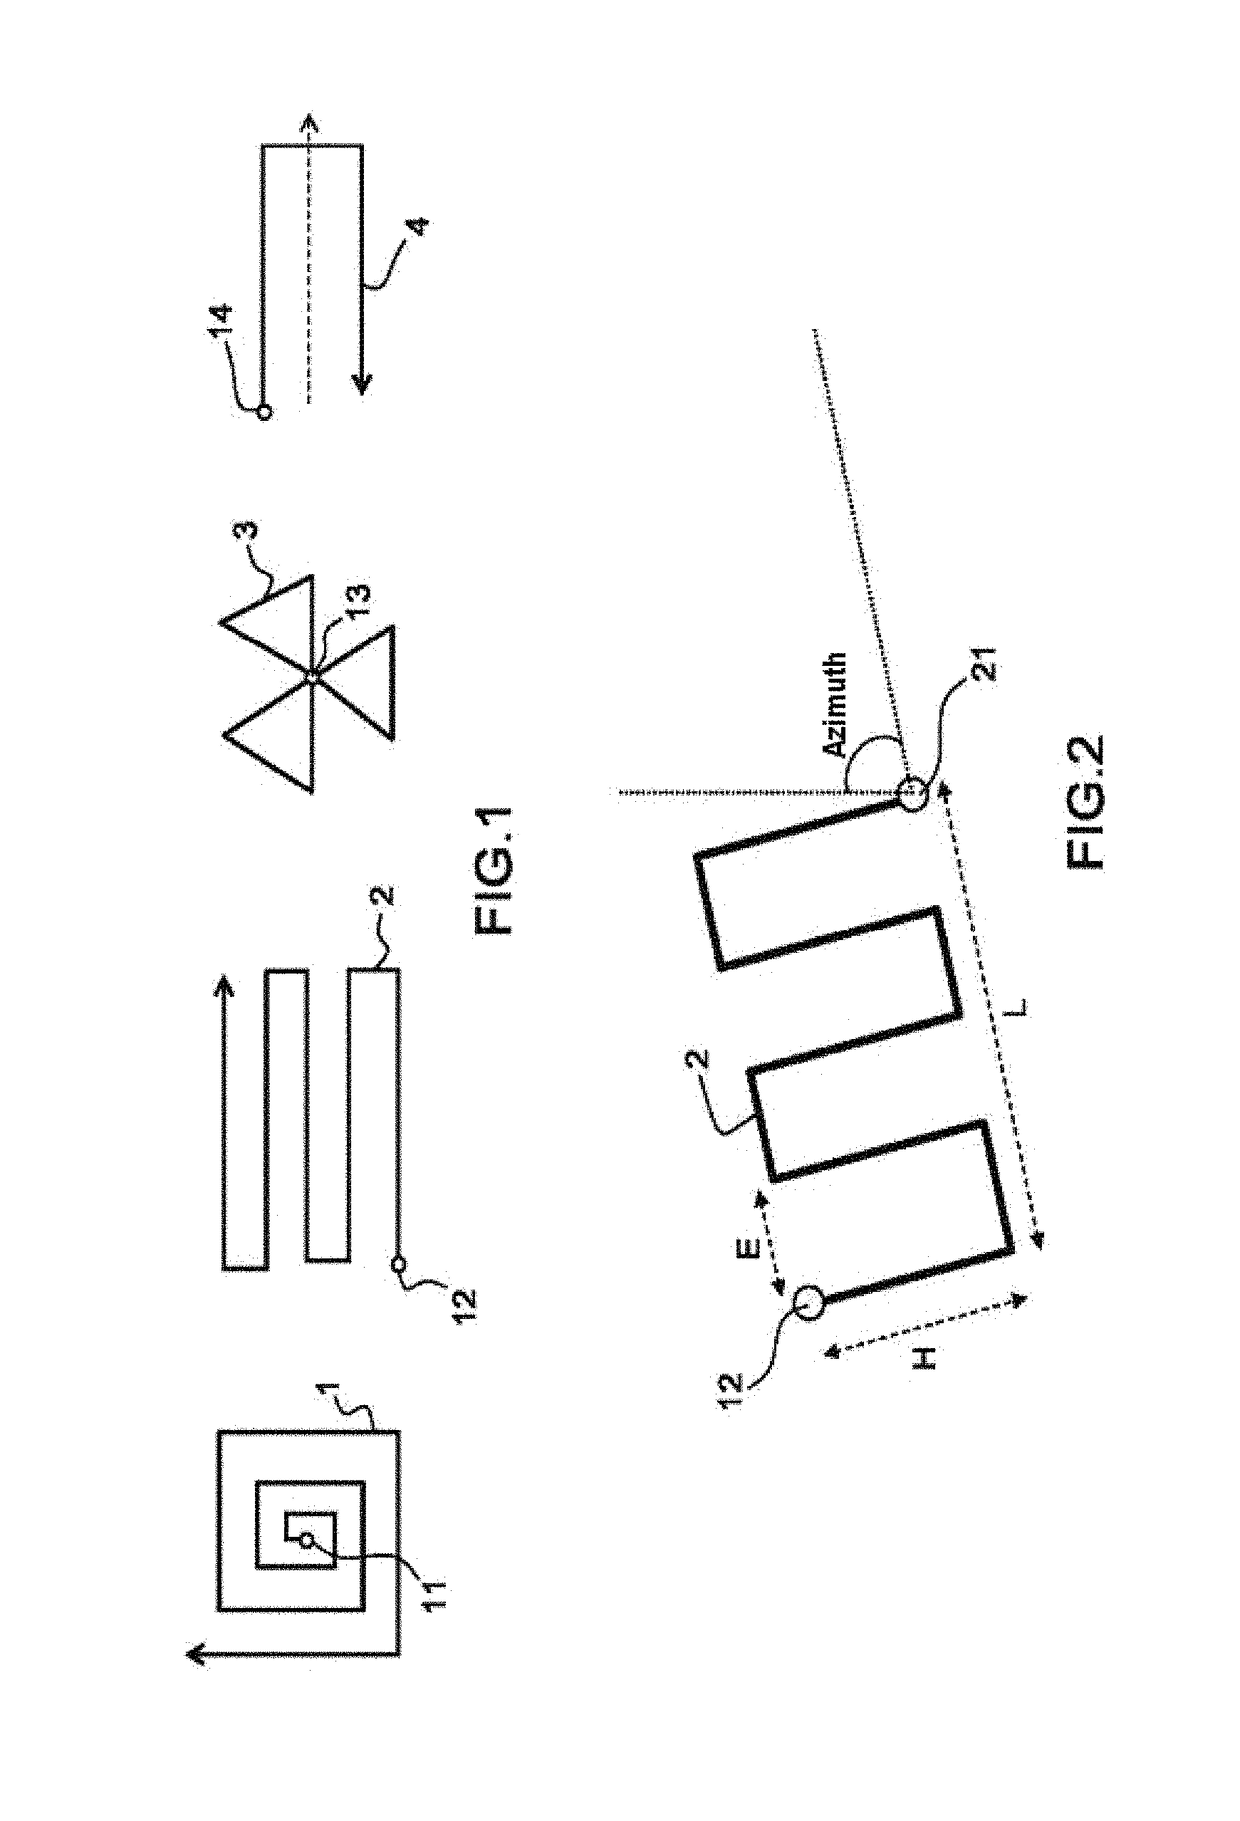 Device for displaying and updating trajectory patterns, in particular SAR trajectory patterns